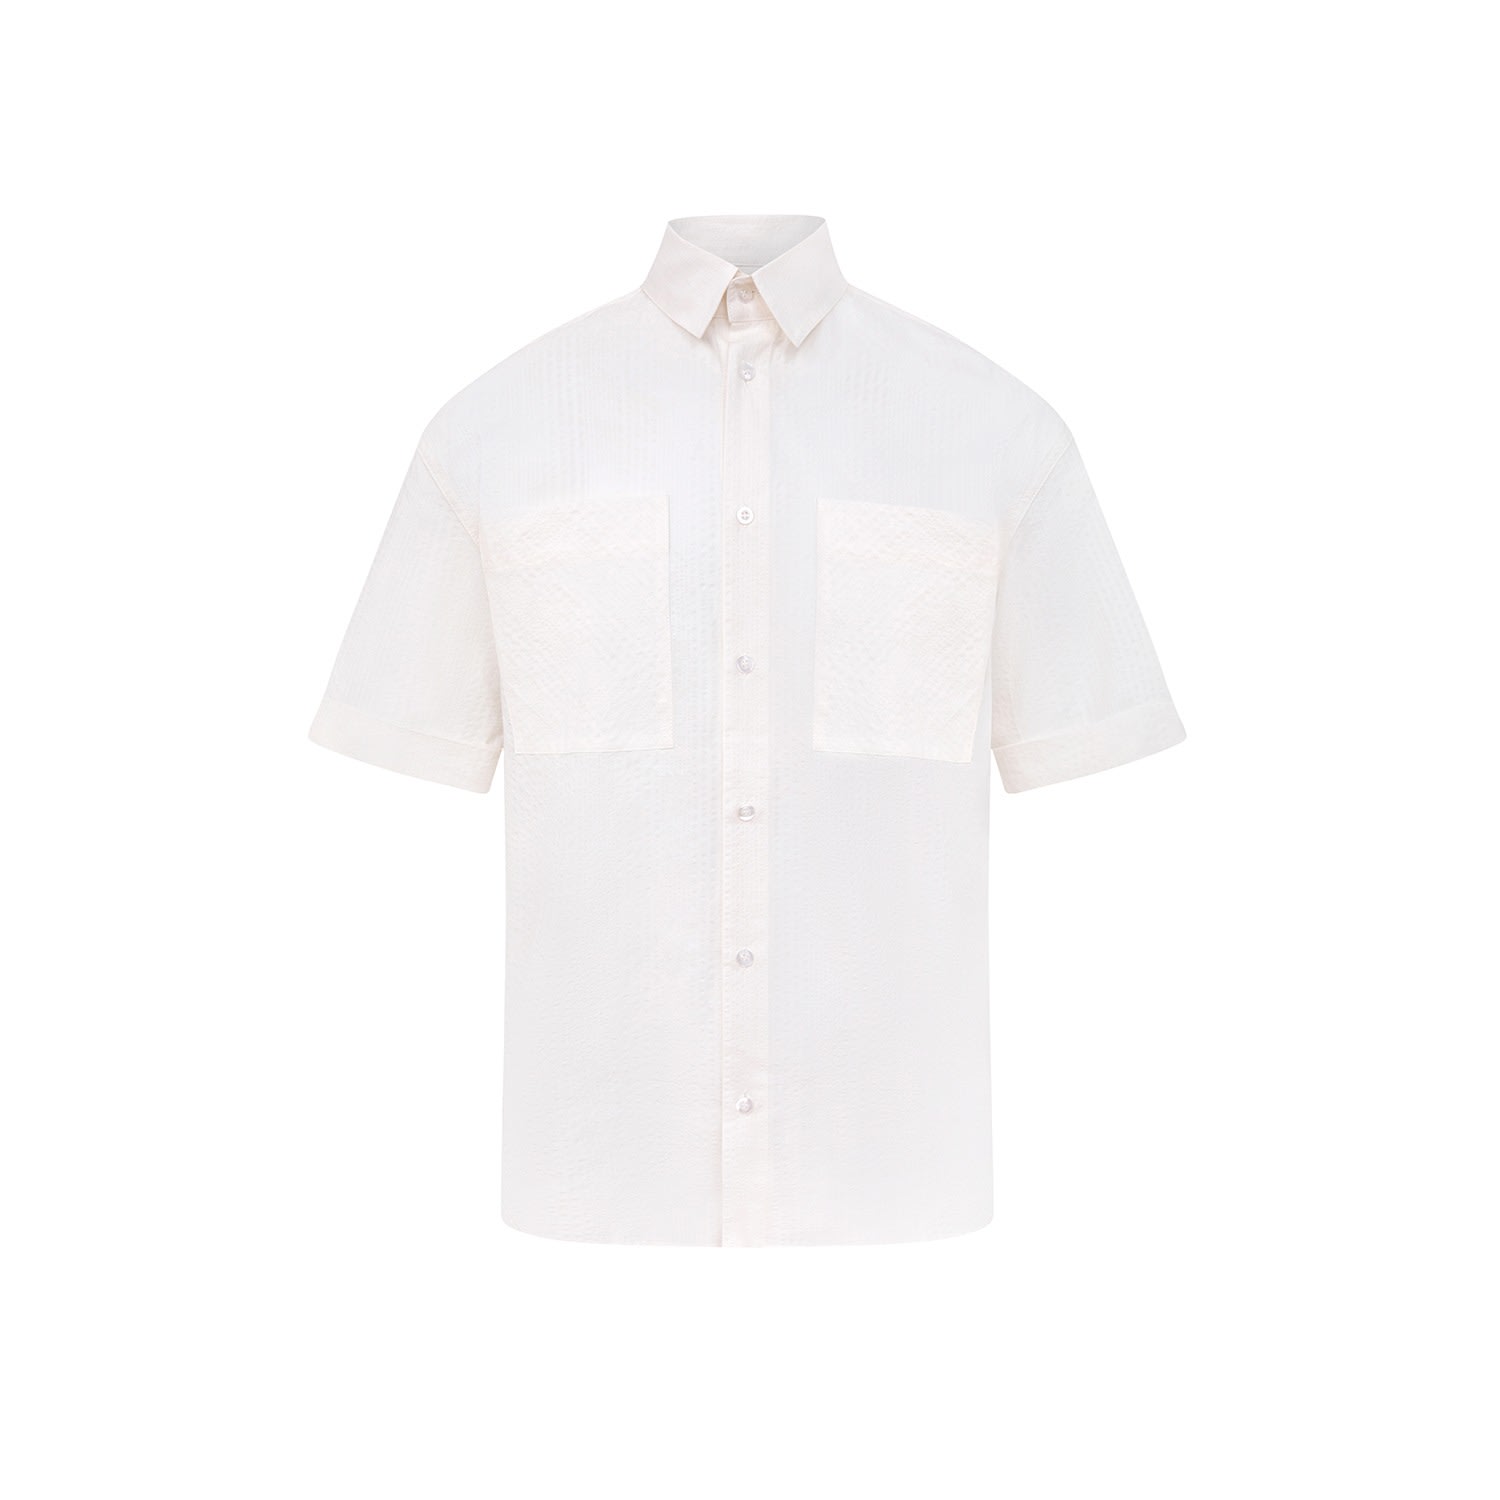 Mens Linen Summer Shirt In White Small blonde gone rogue